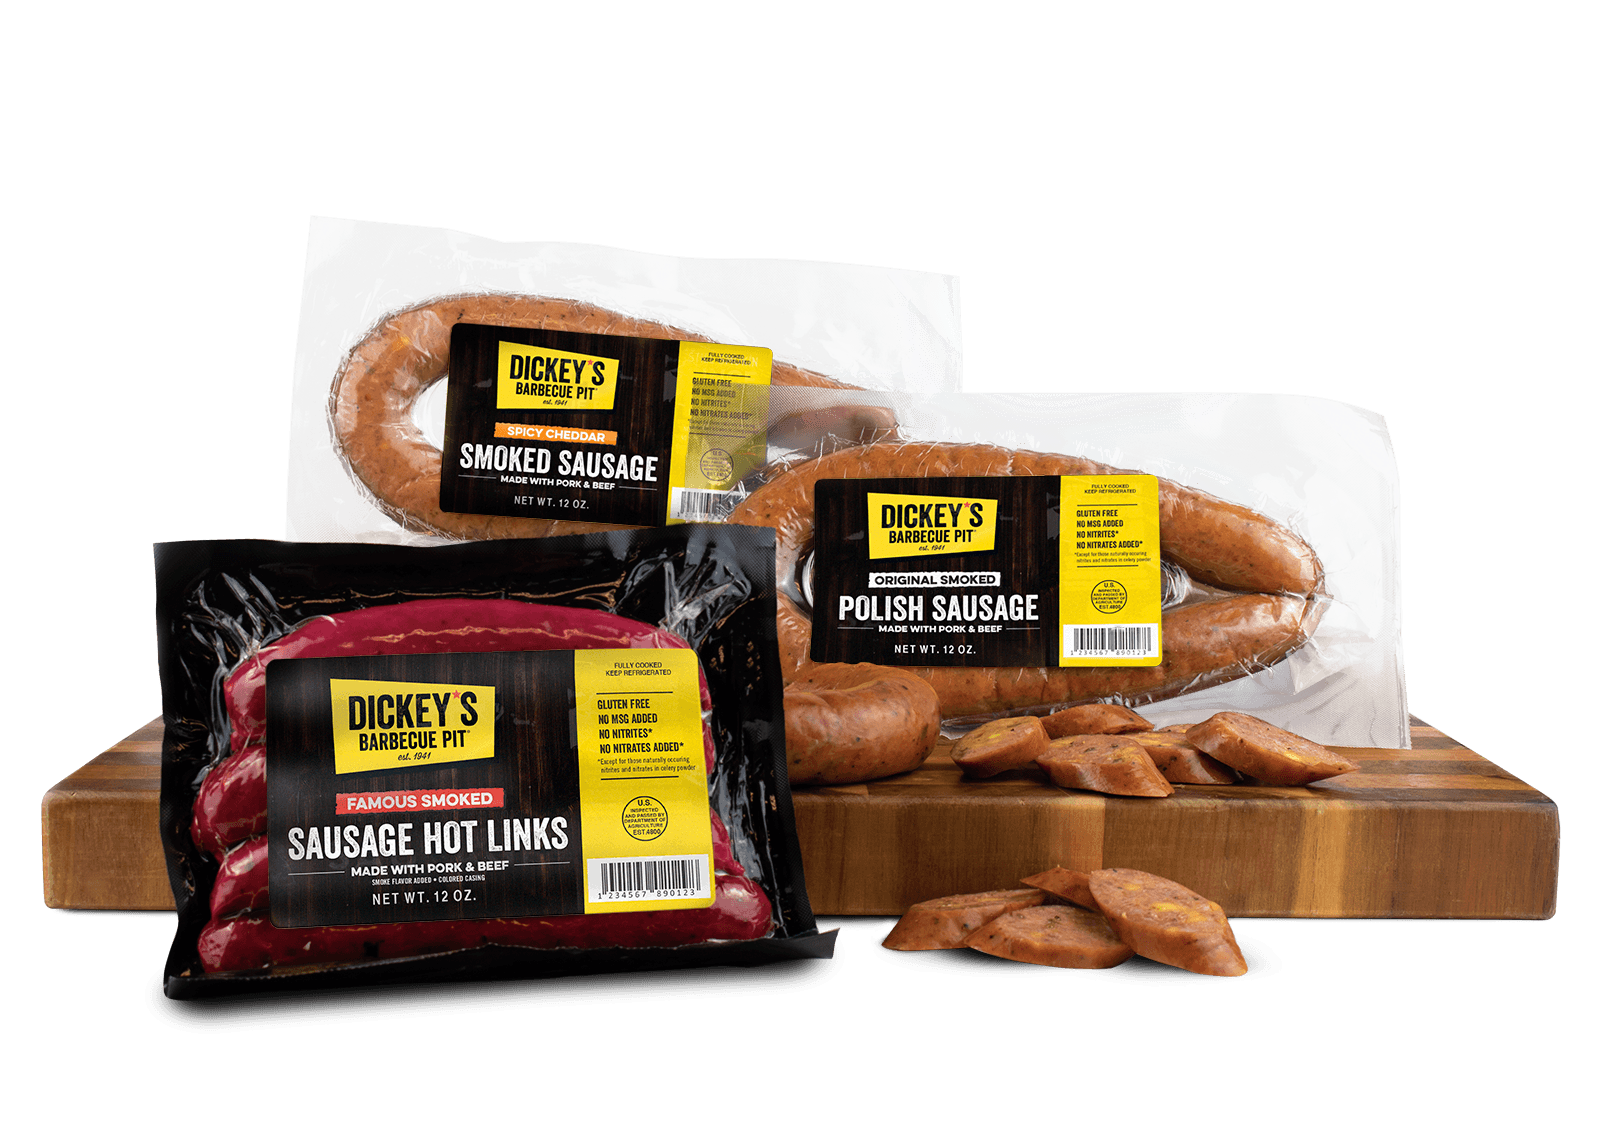 Dickey’s Barbecue Pit Offers Sausage in Safeway and Albertsons in the Southwest